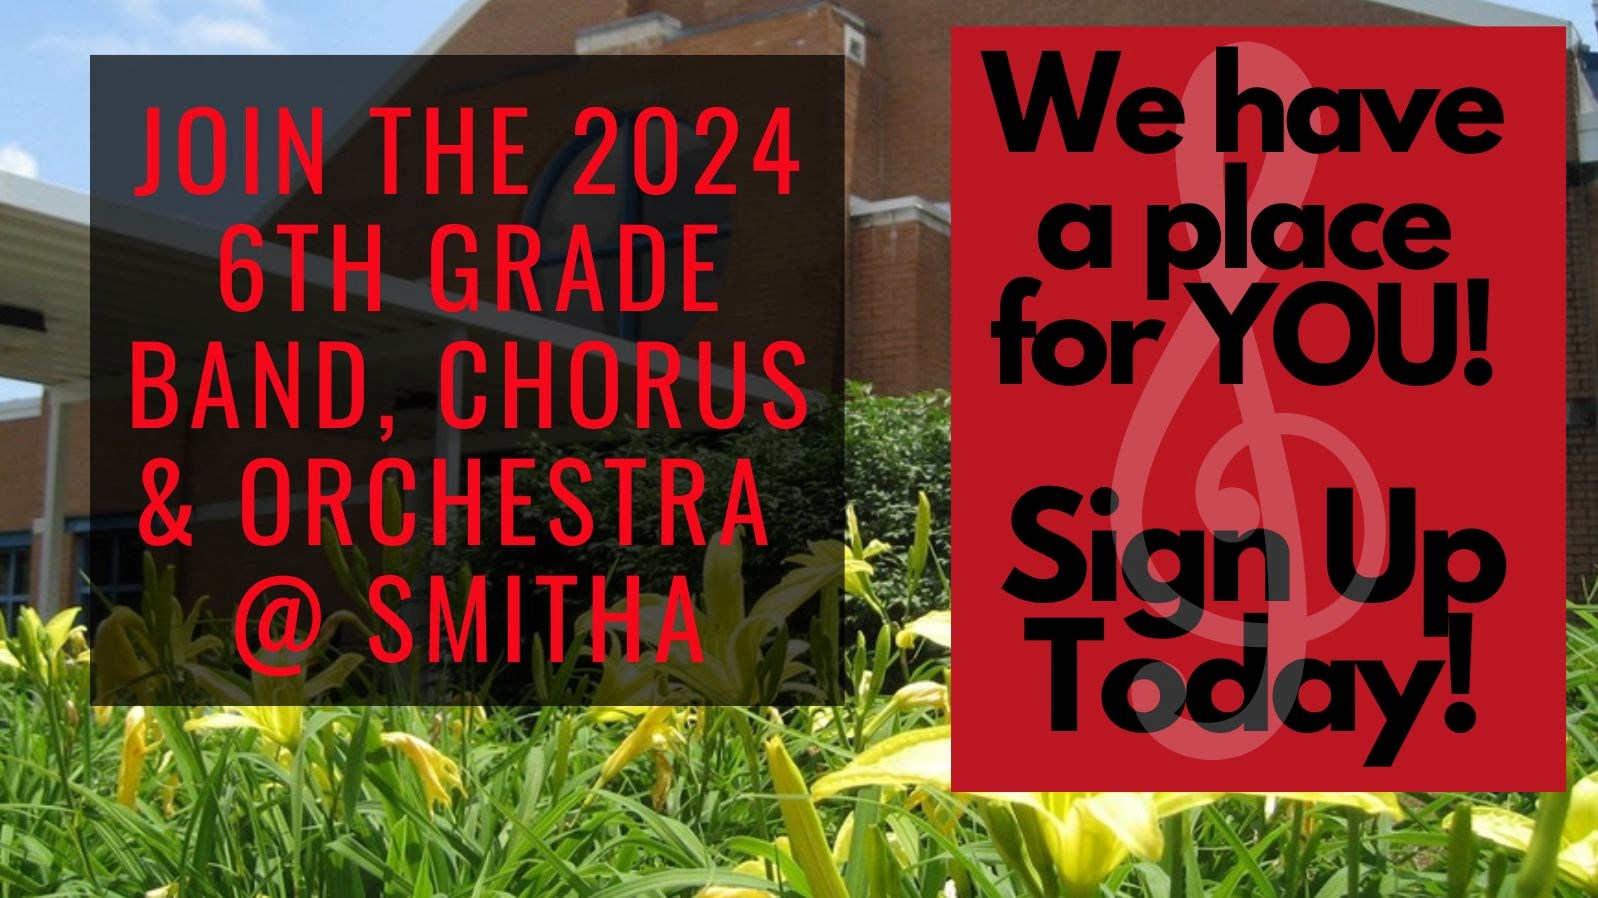 image of smitha middle school. text reads Join the 2024 6th Grade Band, Chorus and Orchestra at Smitha! We have a place for YOU! Sign up today!